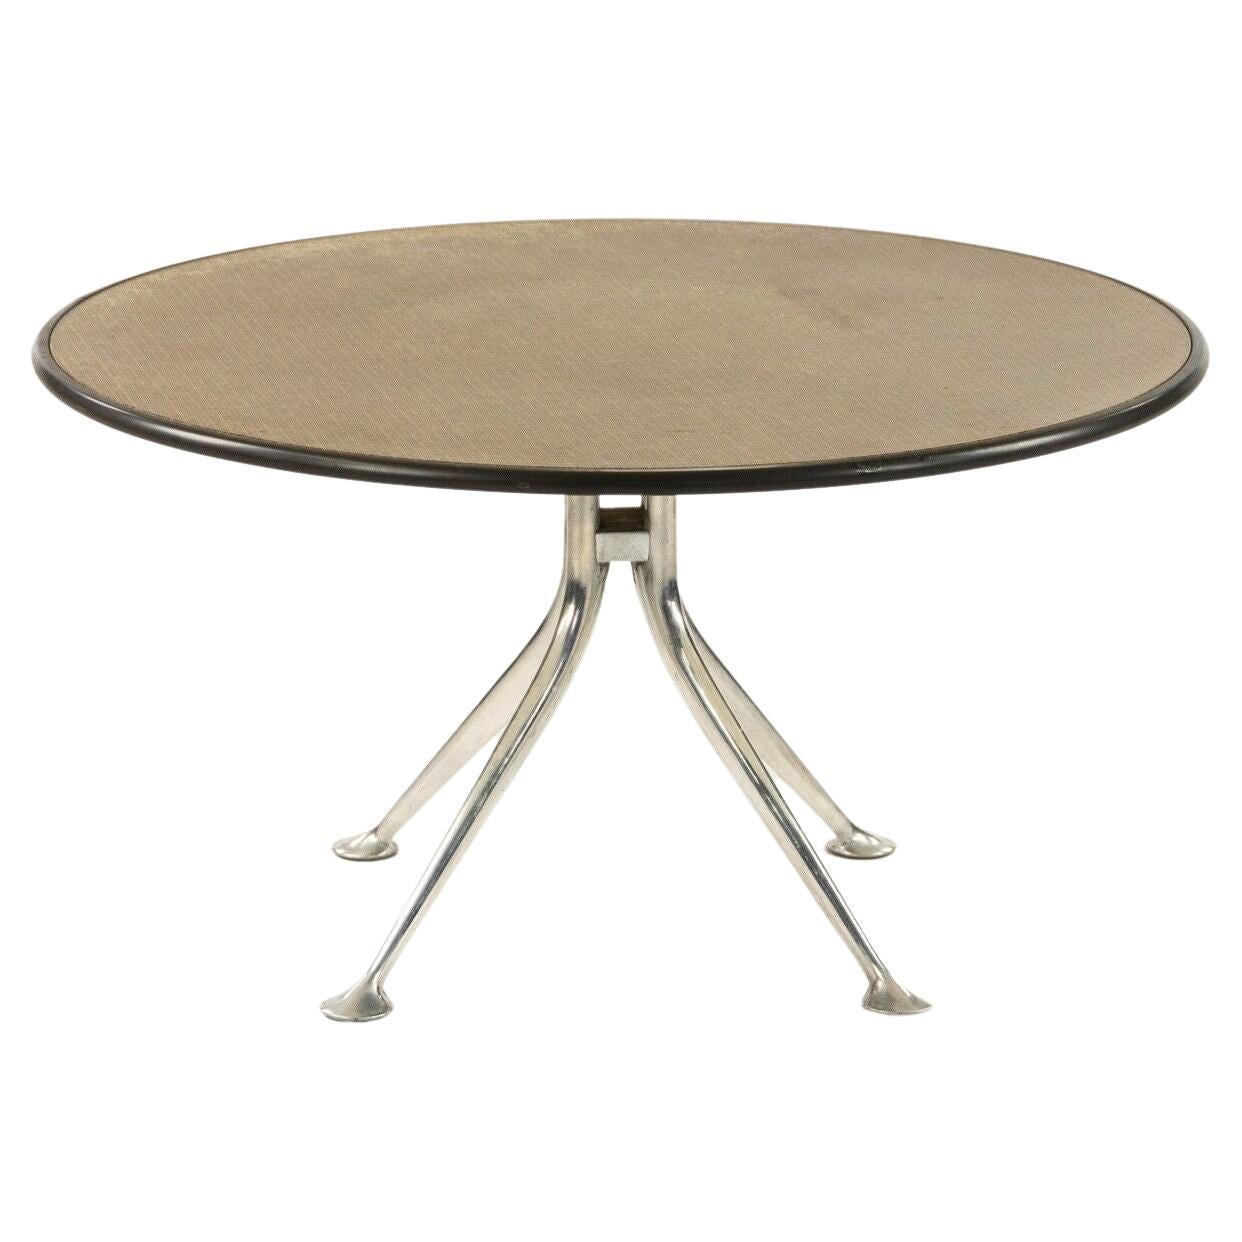 1967 Rare Alexander Girard/Ray Eames/Charles Eames Coffee Table w/ Gold Laminate For Sale